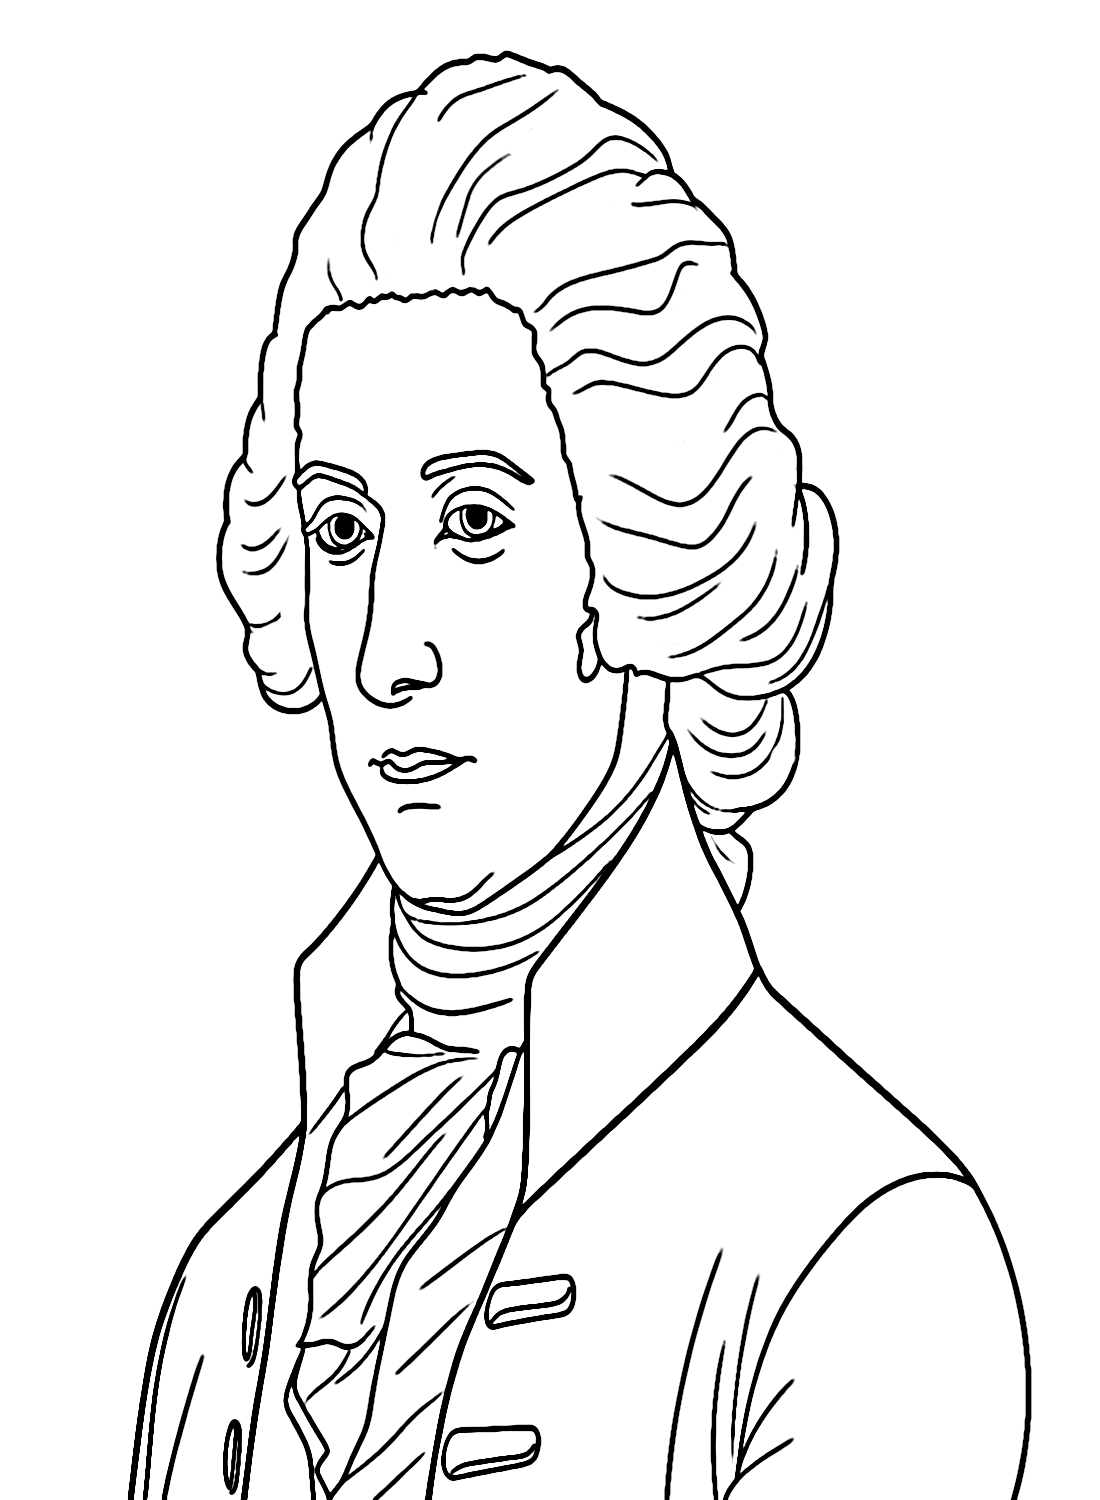 Alexander Hamilton Coloring Pages Printable for Free Download